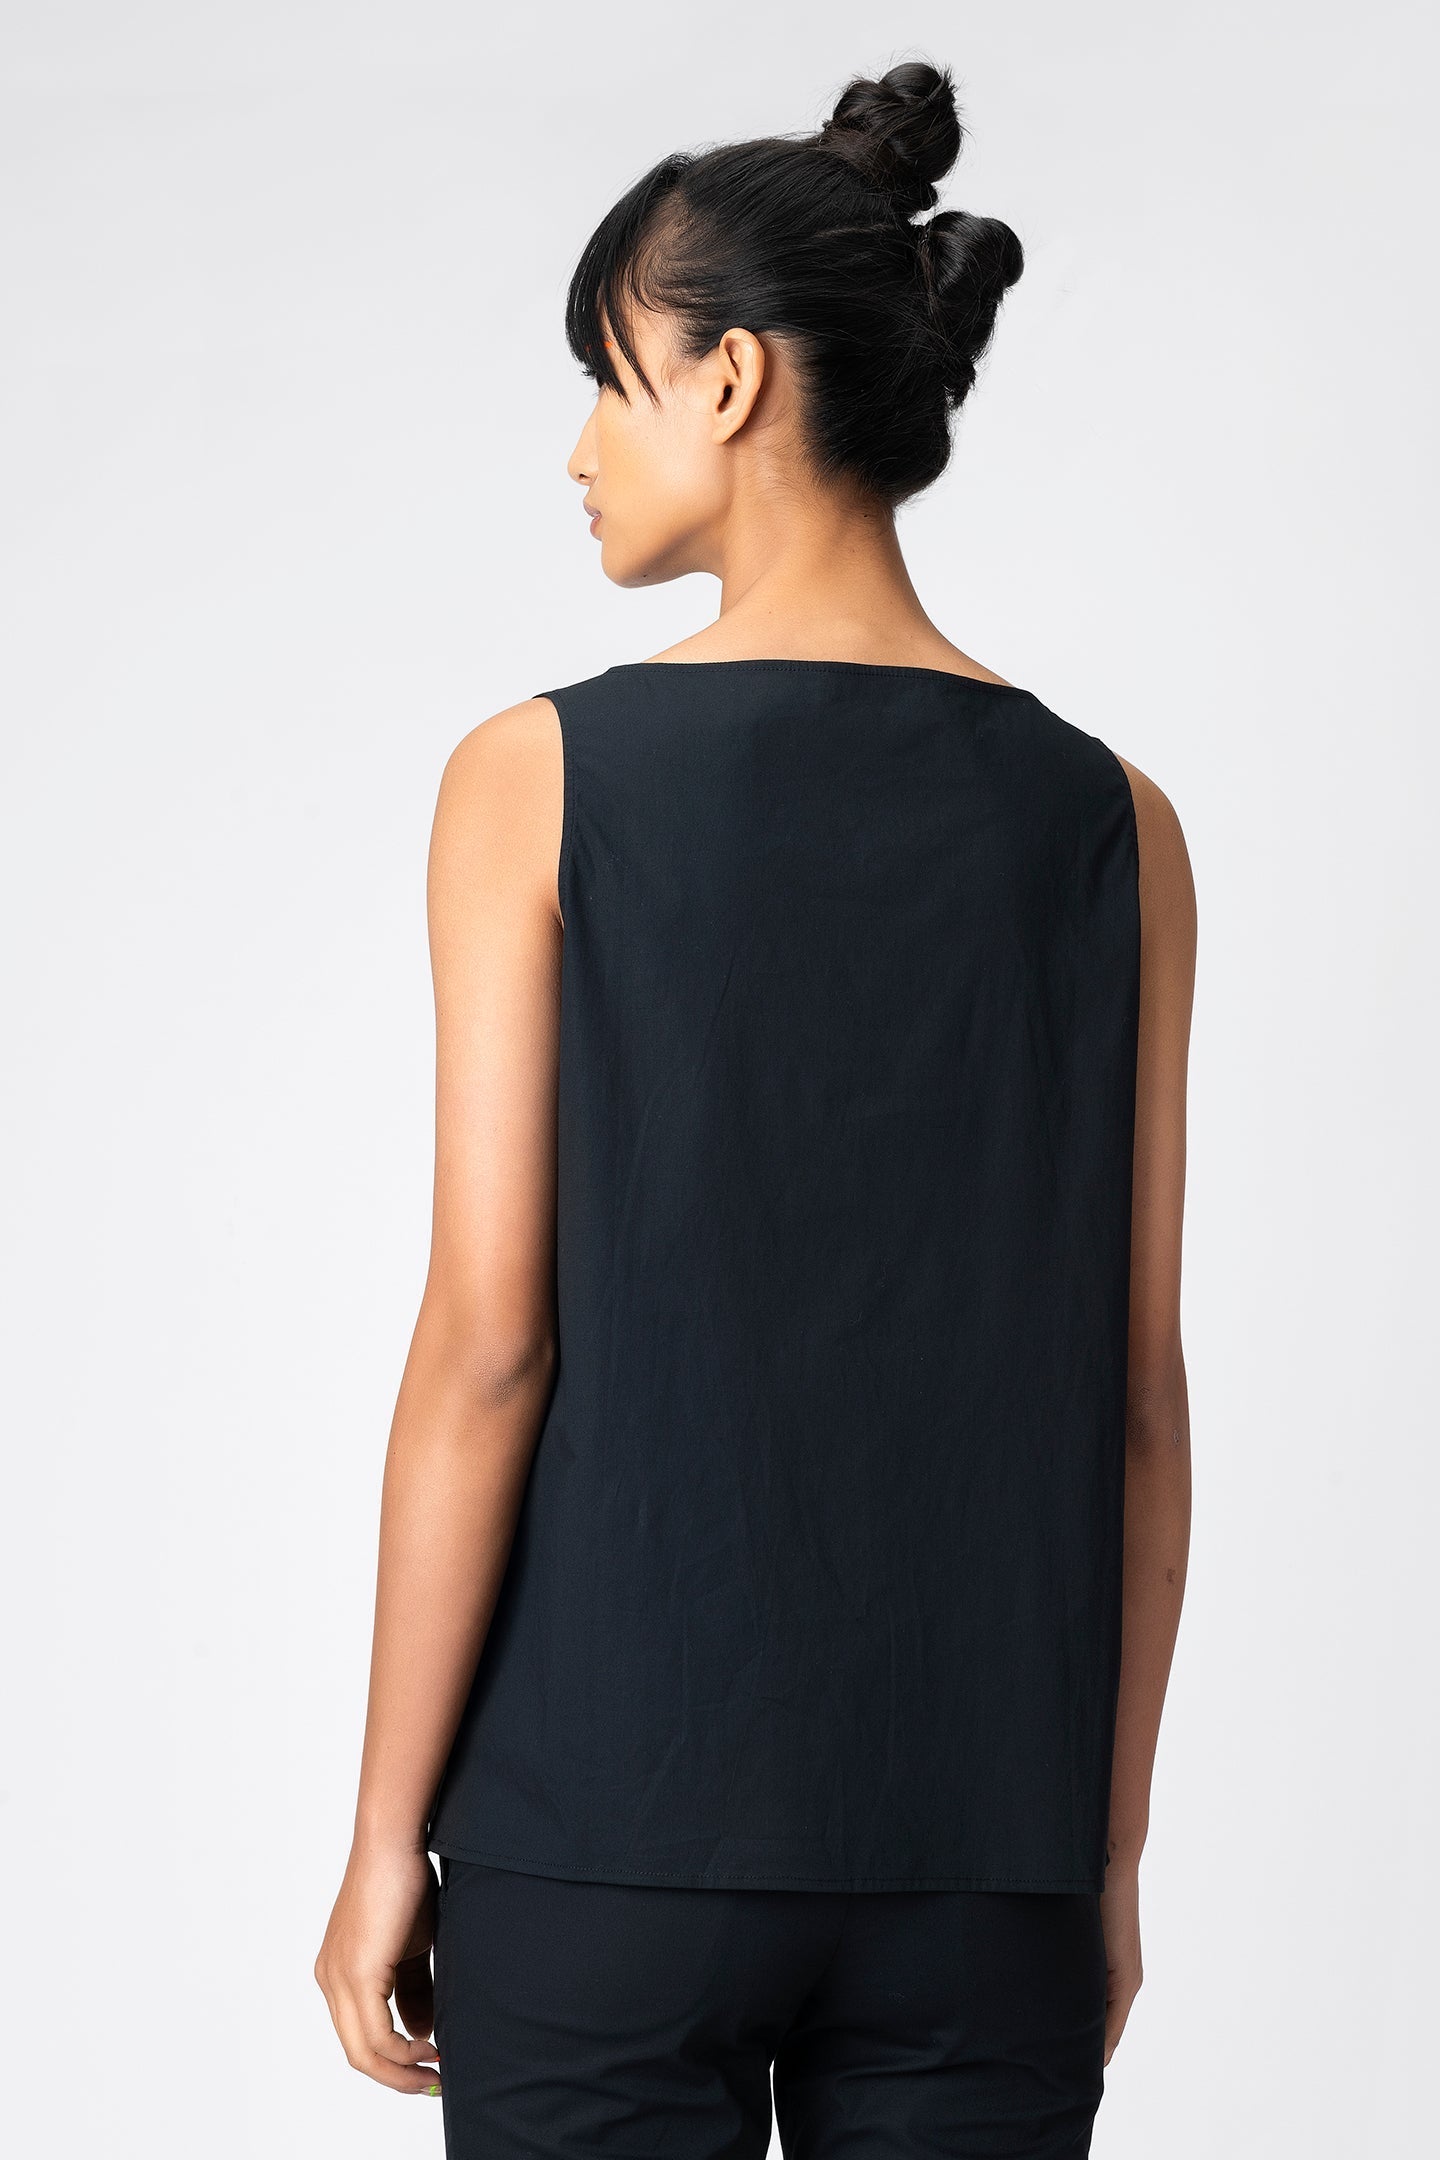 midnight-black-embroidered-draped-top - Genes online store 2020